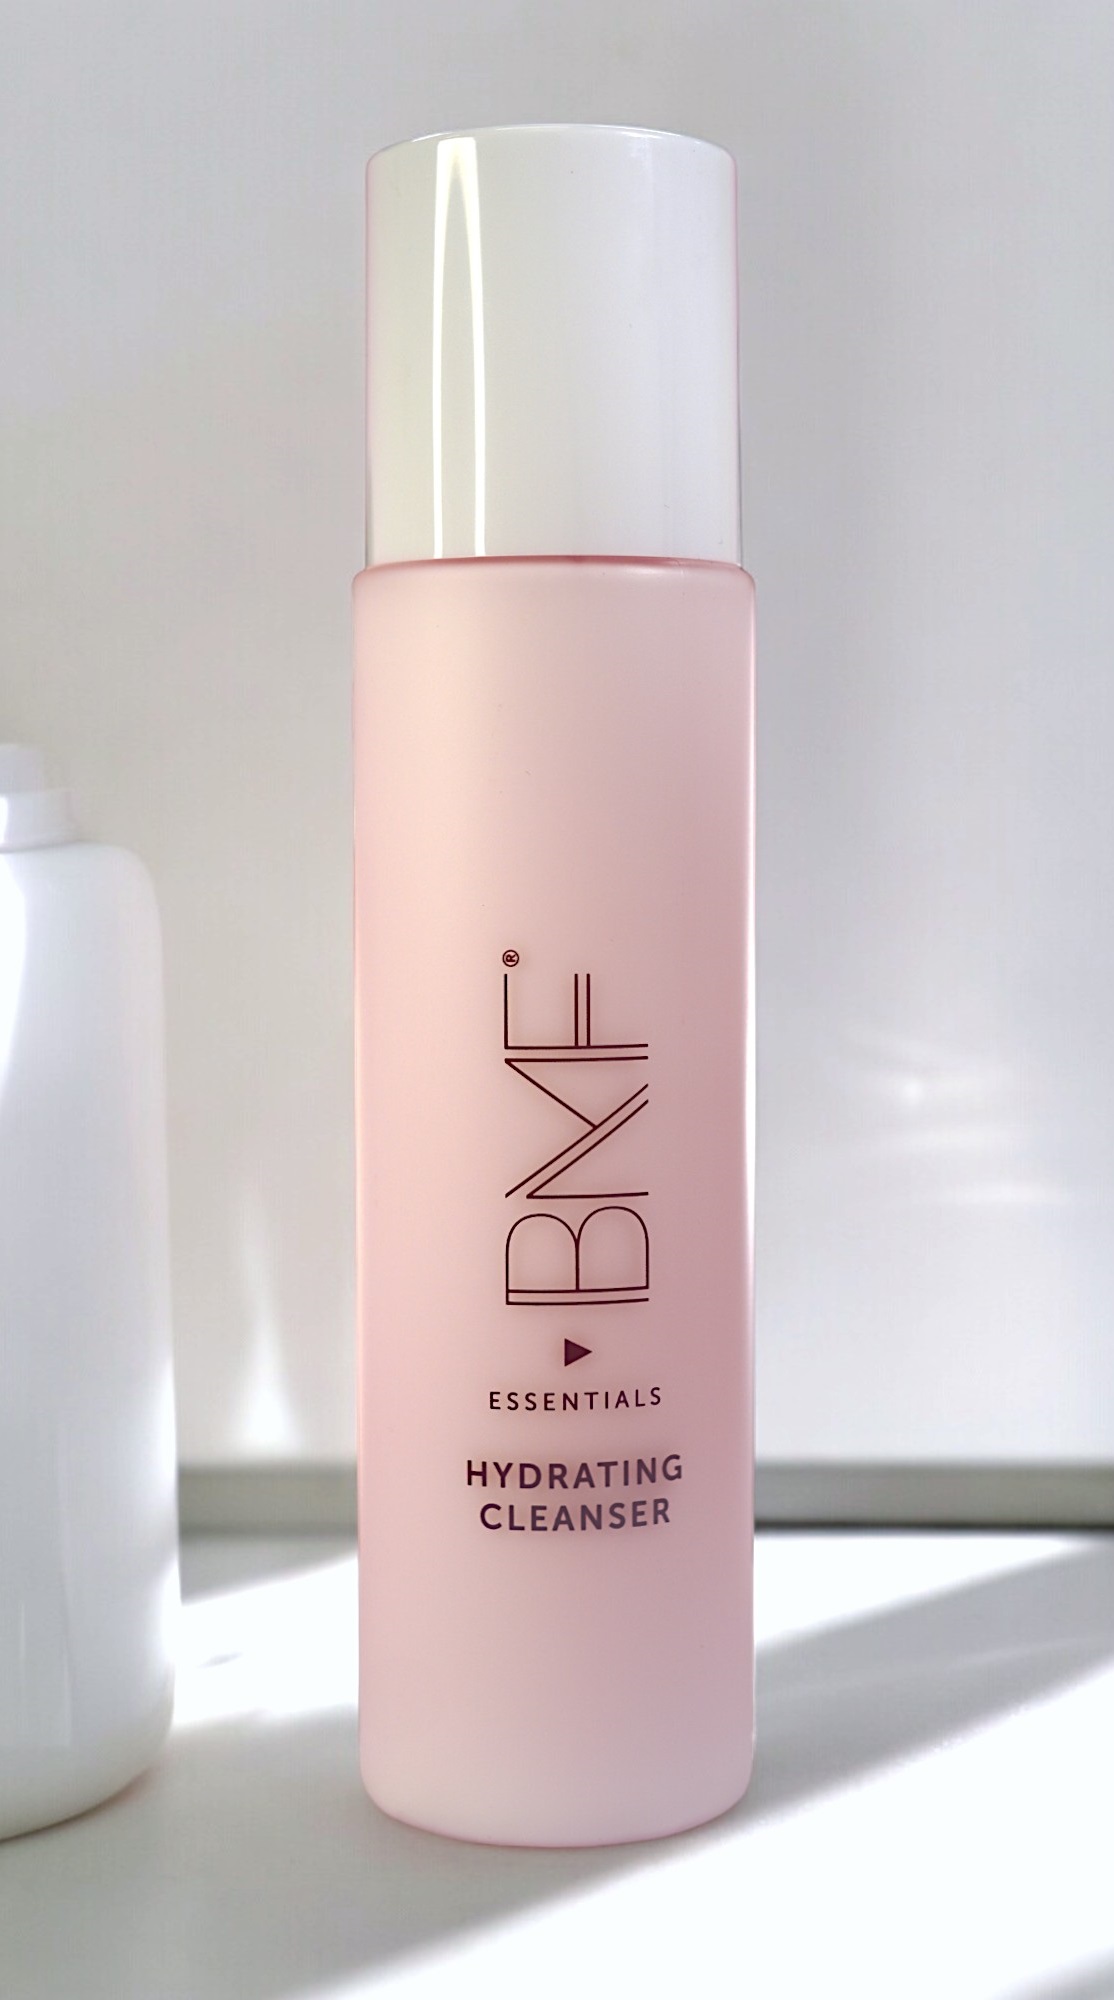 HYDRATING CLEANSER